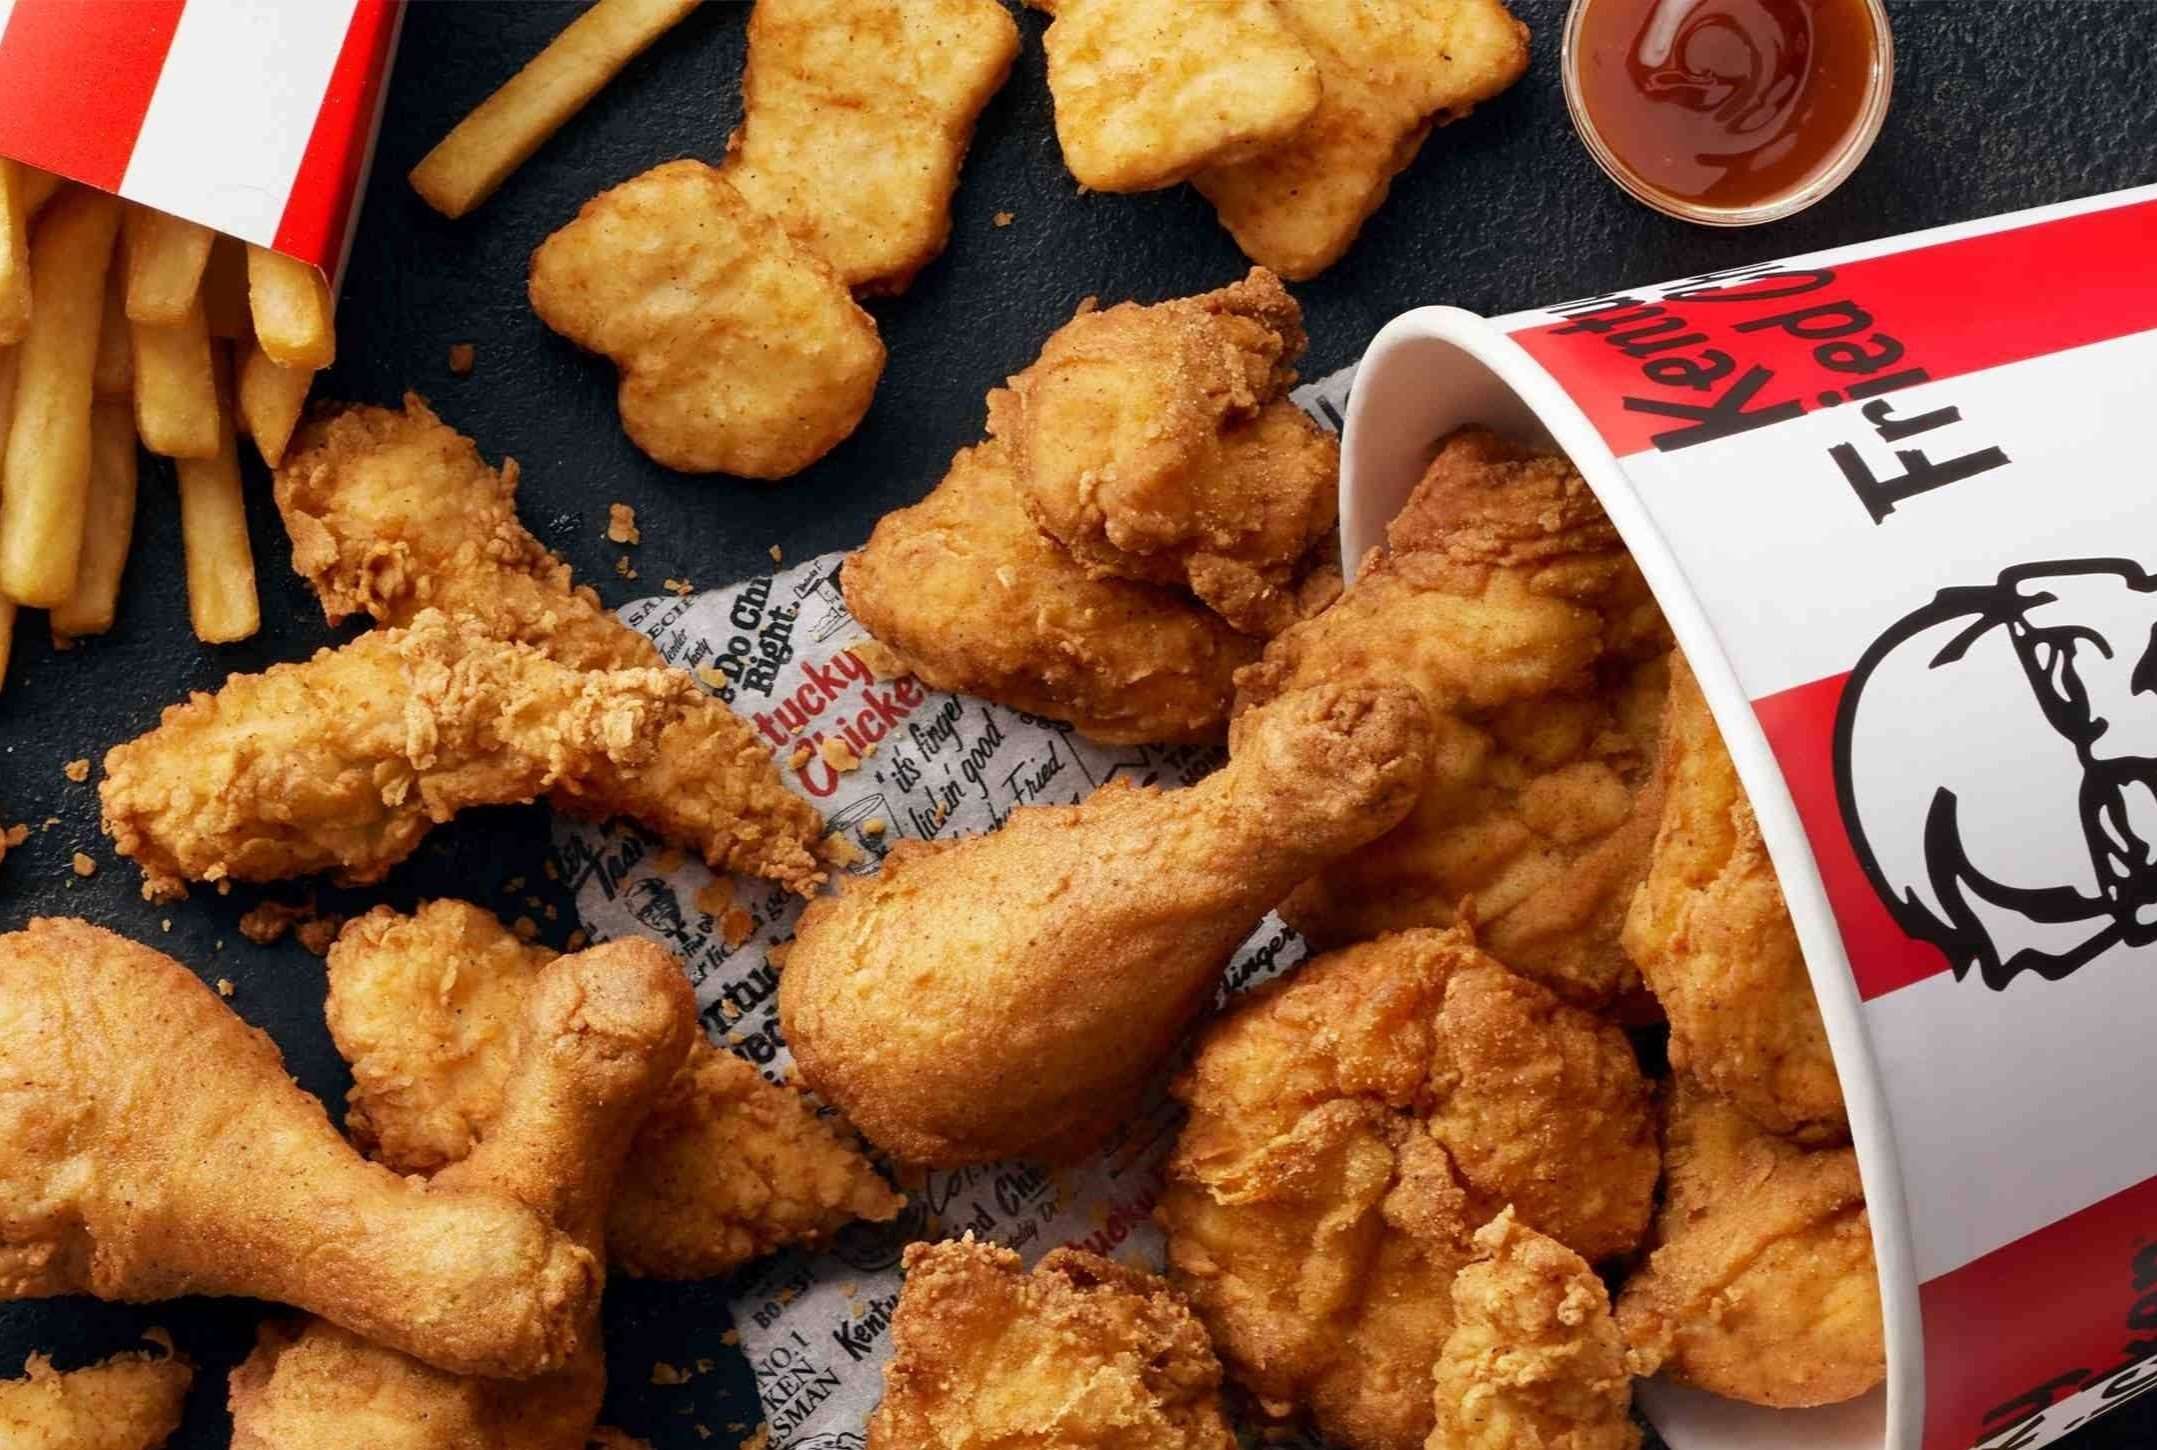 Discover KFC’s Mouthwatering Breakfast Hours!